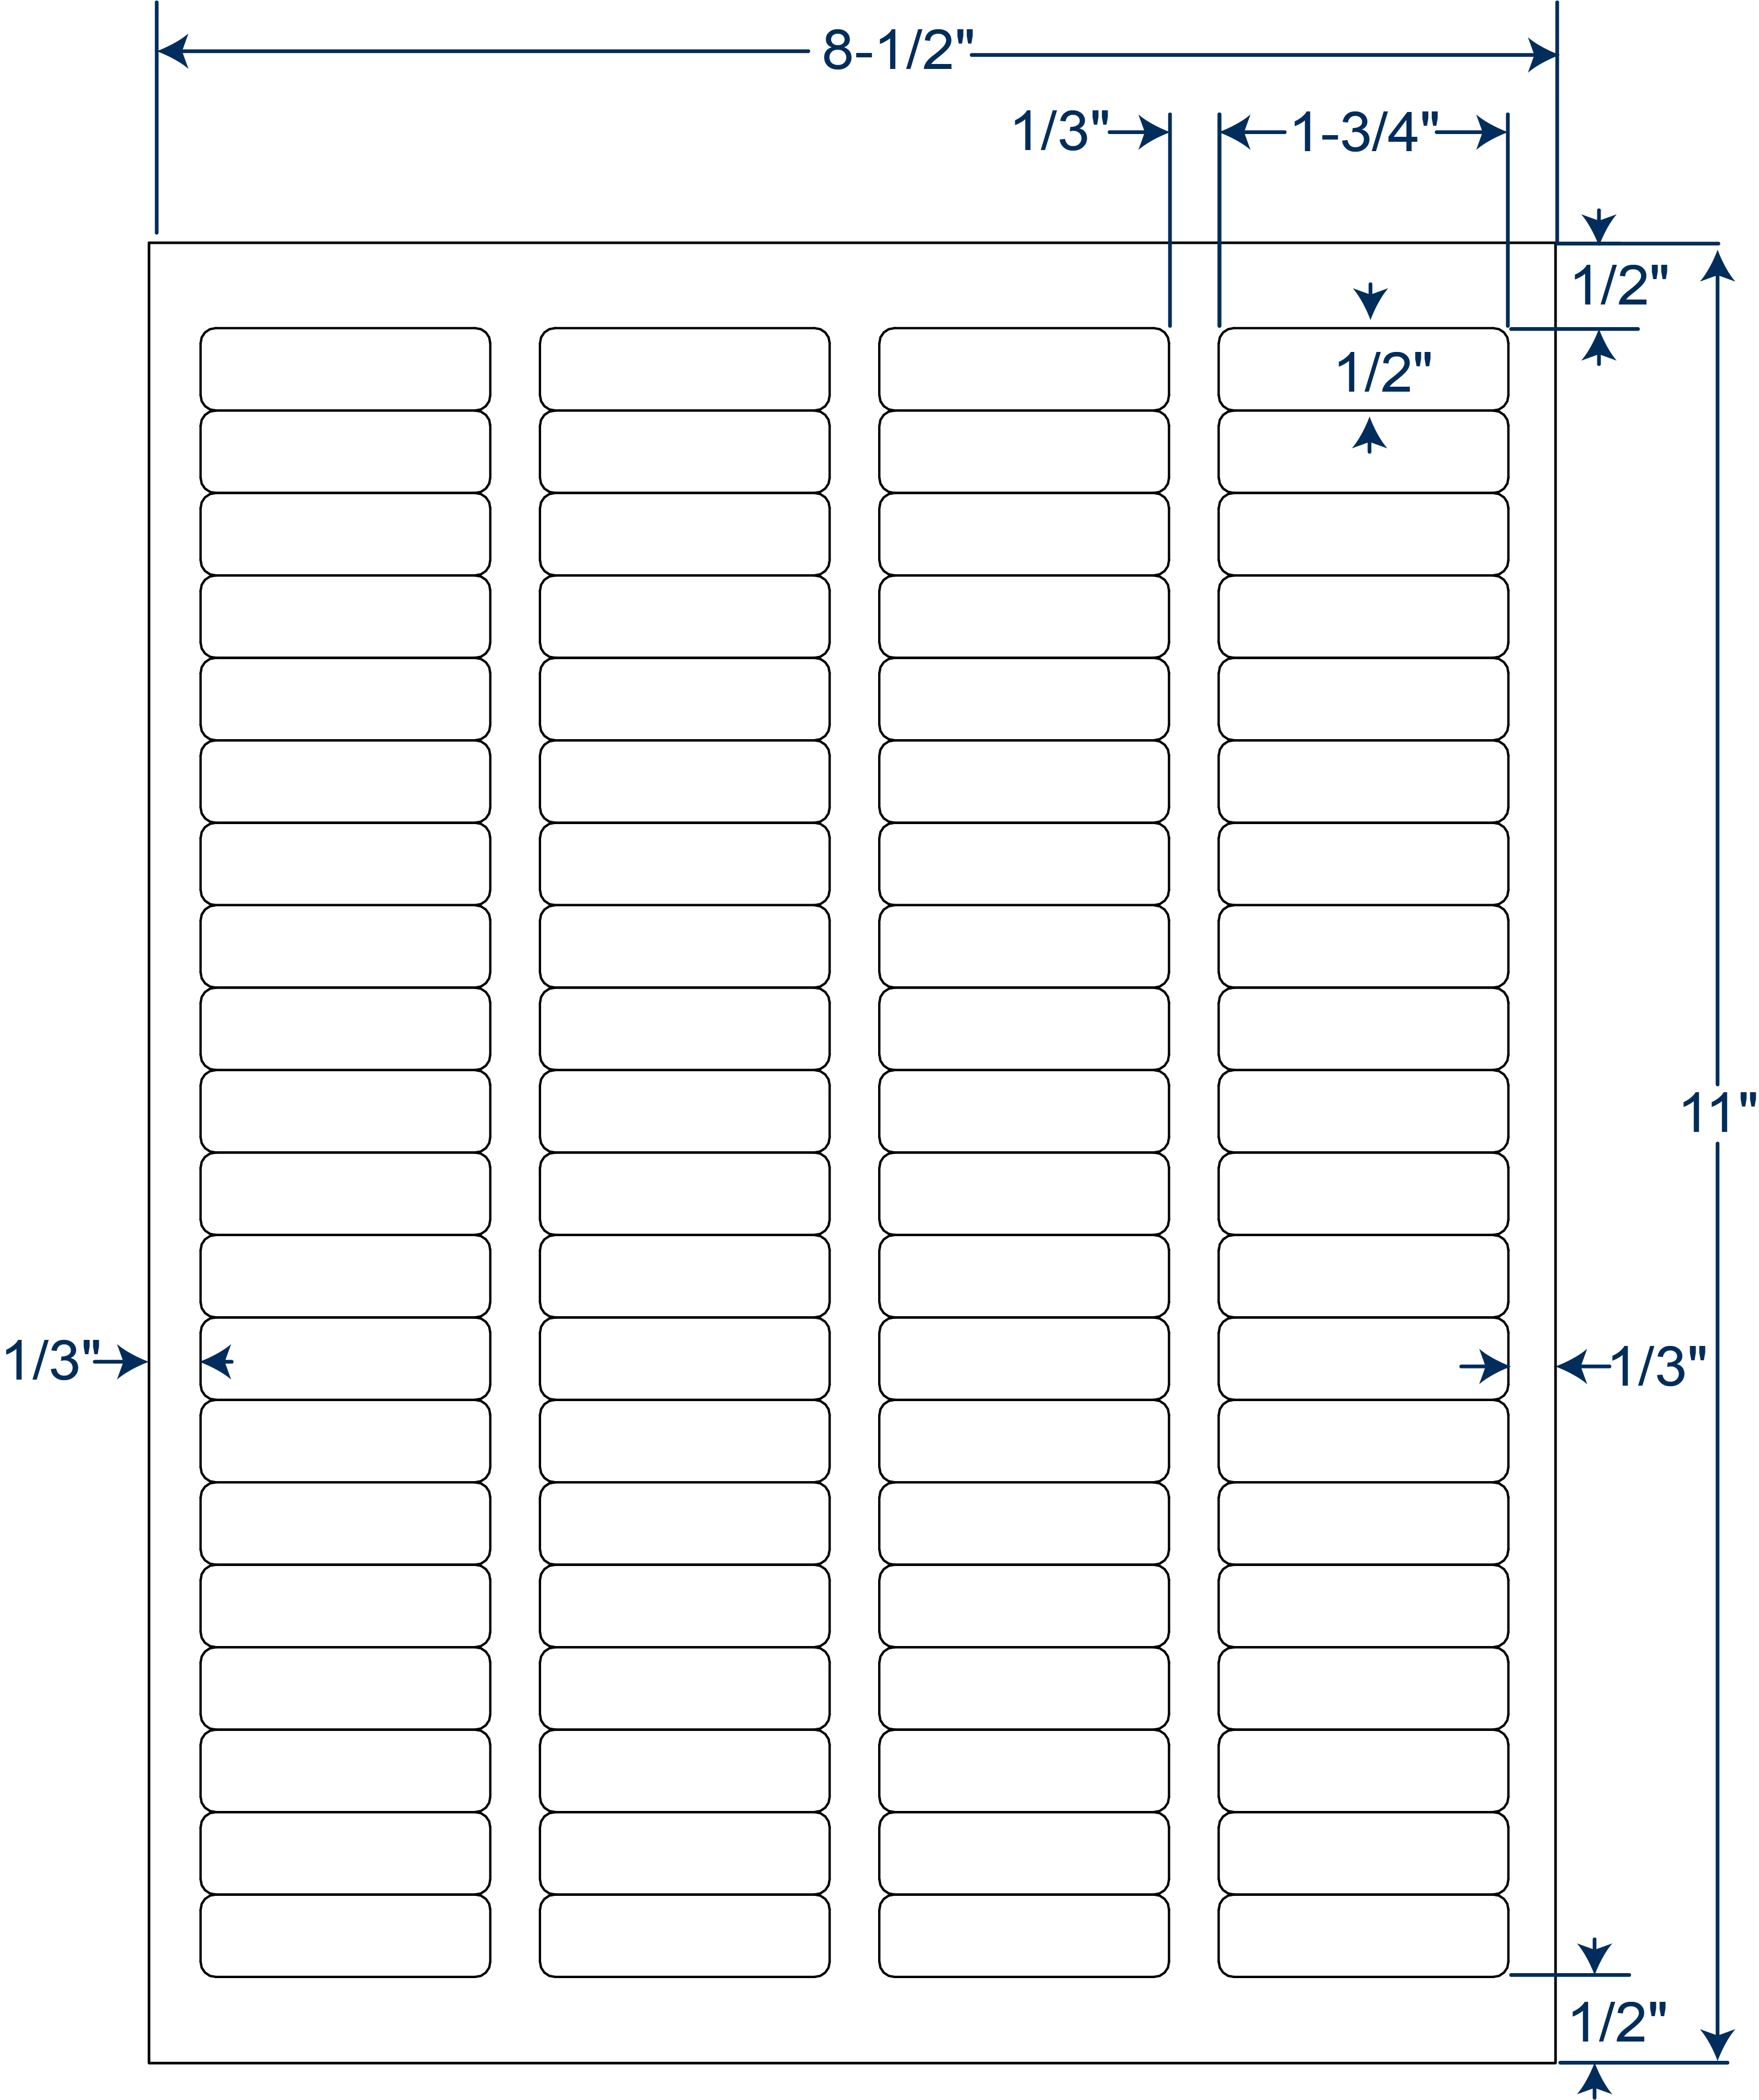 1-3/4" x 1/2" Permanent Sheeted Labels (250 Sheets)